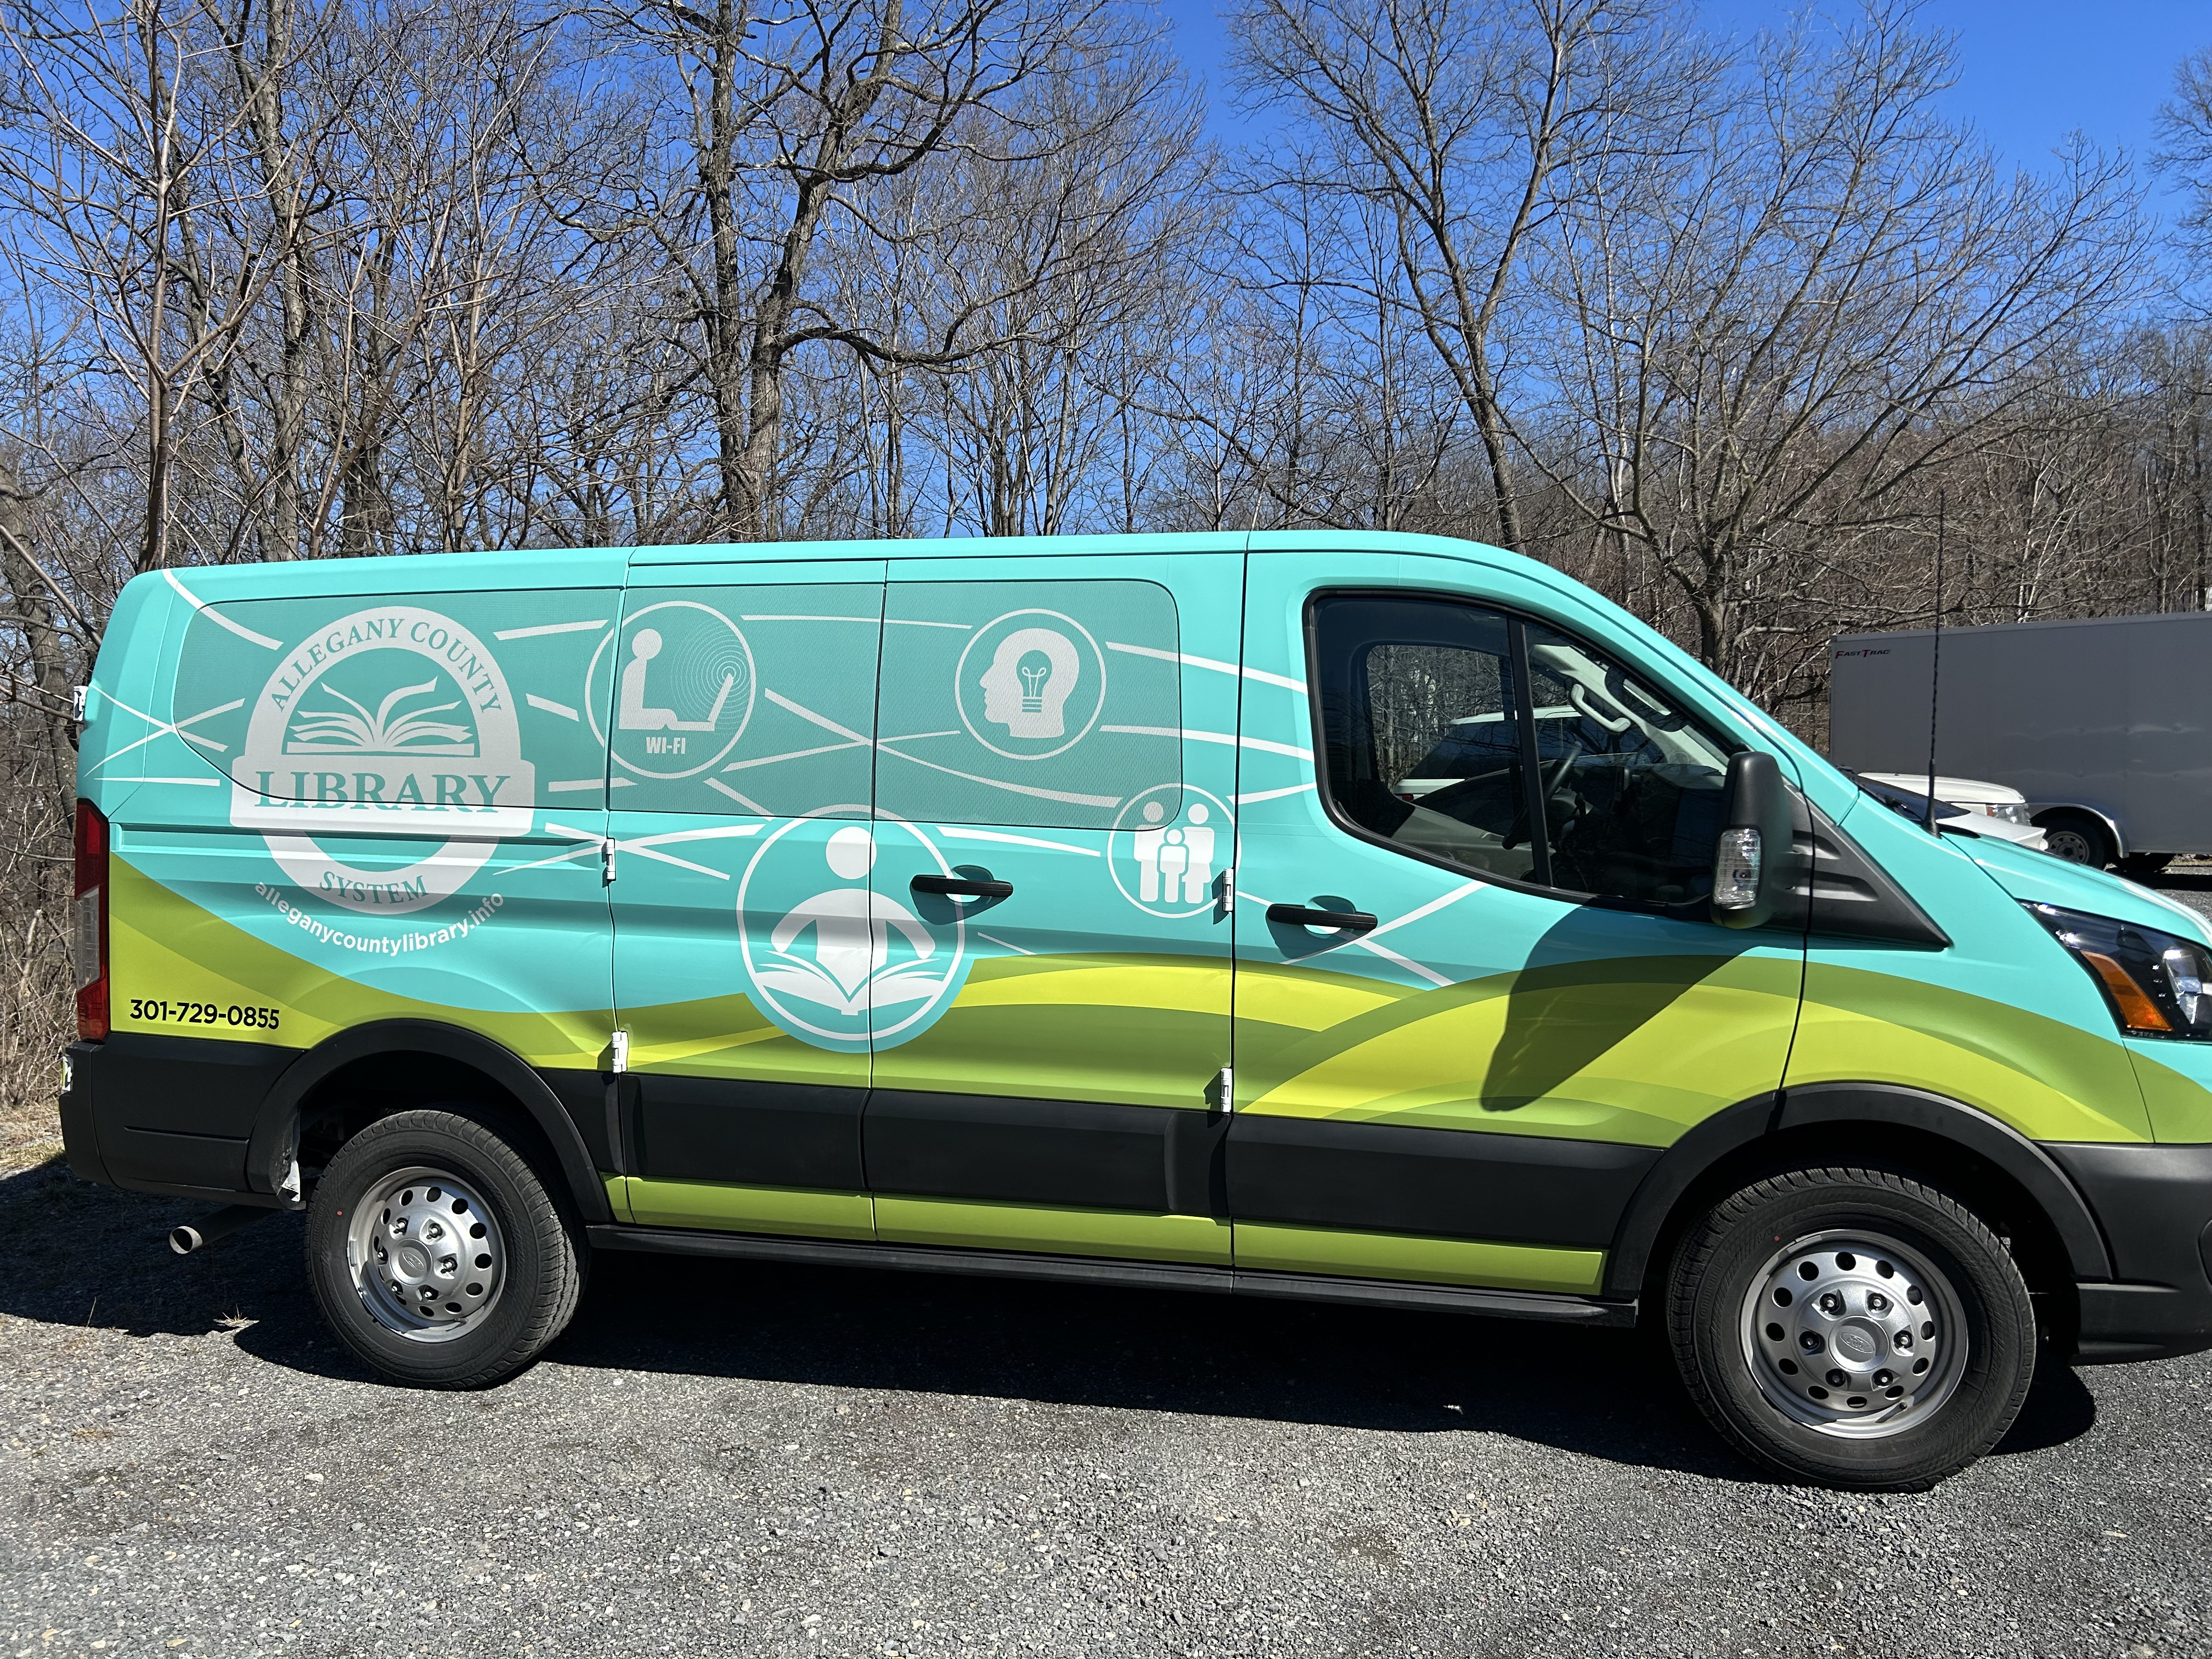 ACLS Express van.  ACLS logo and wavy lines connecting symbols of family, books, online connection, and knowledge 